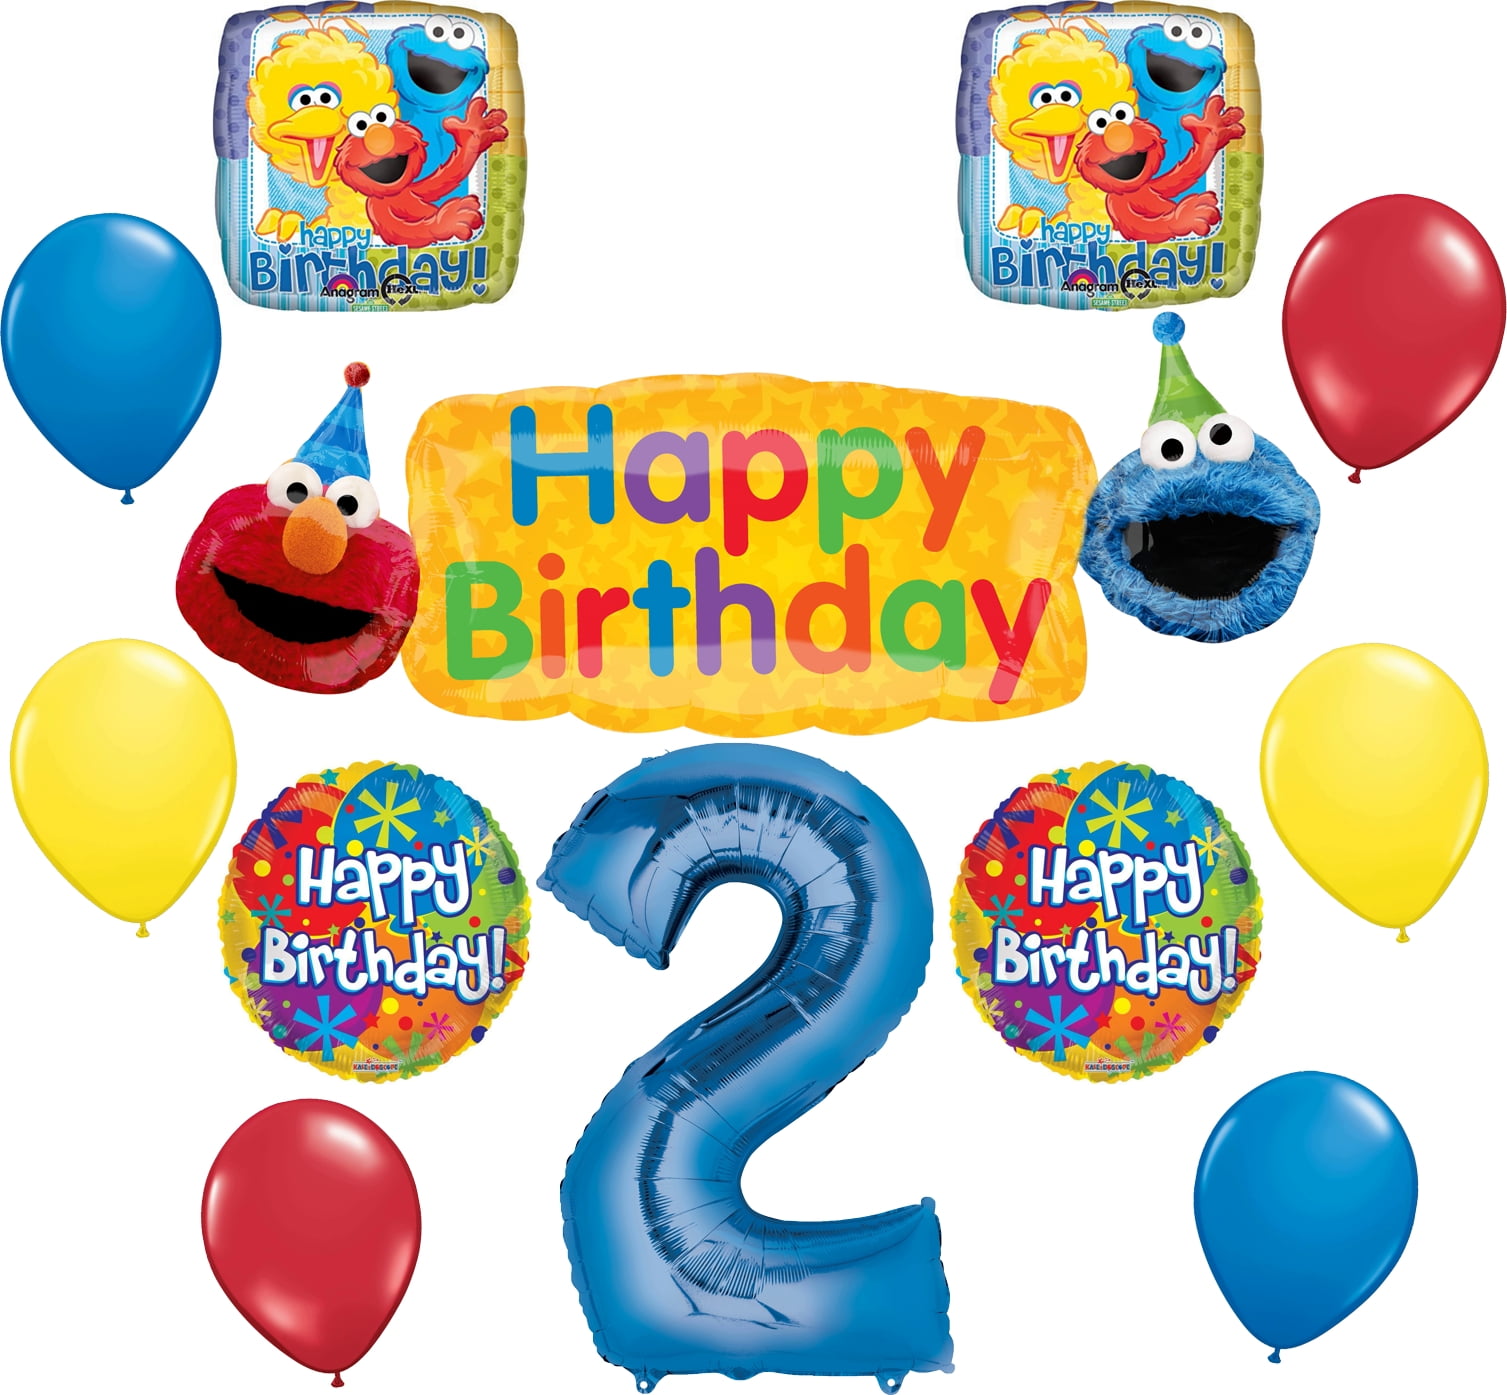 Cookie Monster 1st Birthday Party Supplies 11 pc Balloon Bouquet Decorations